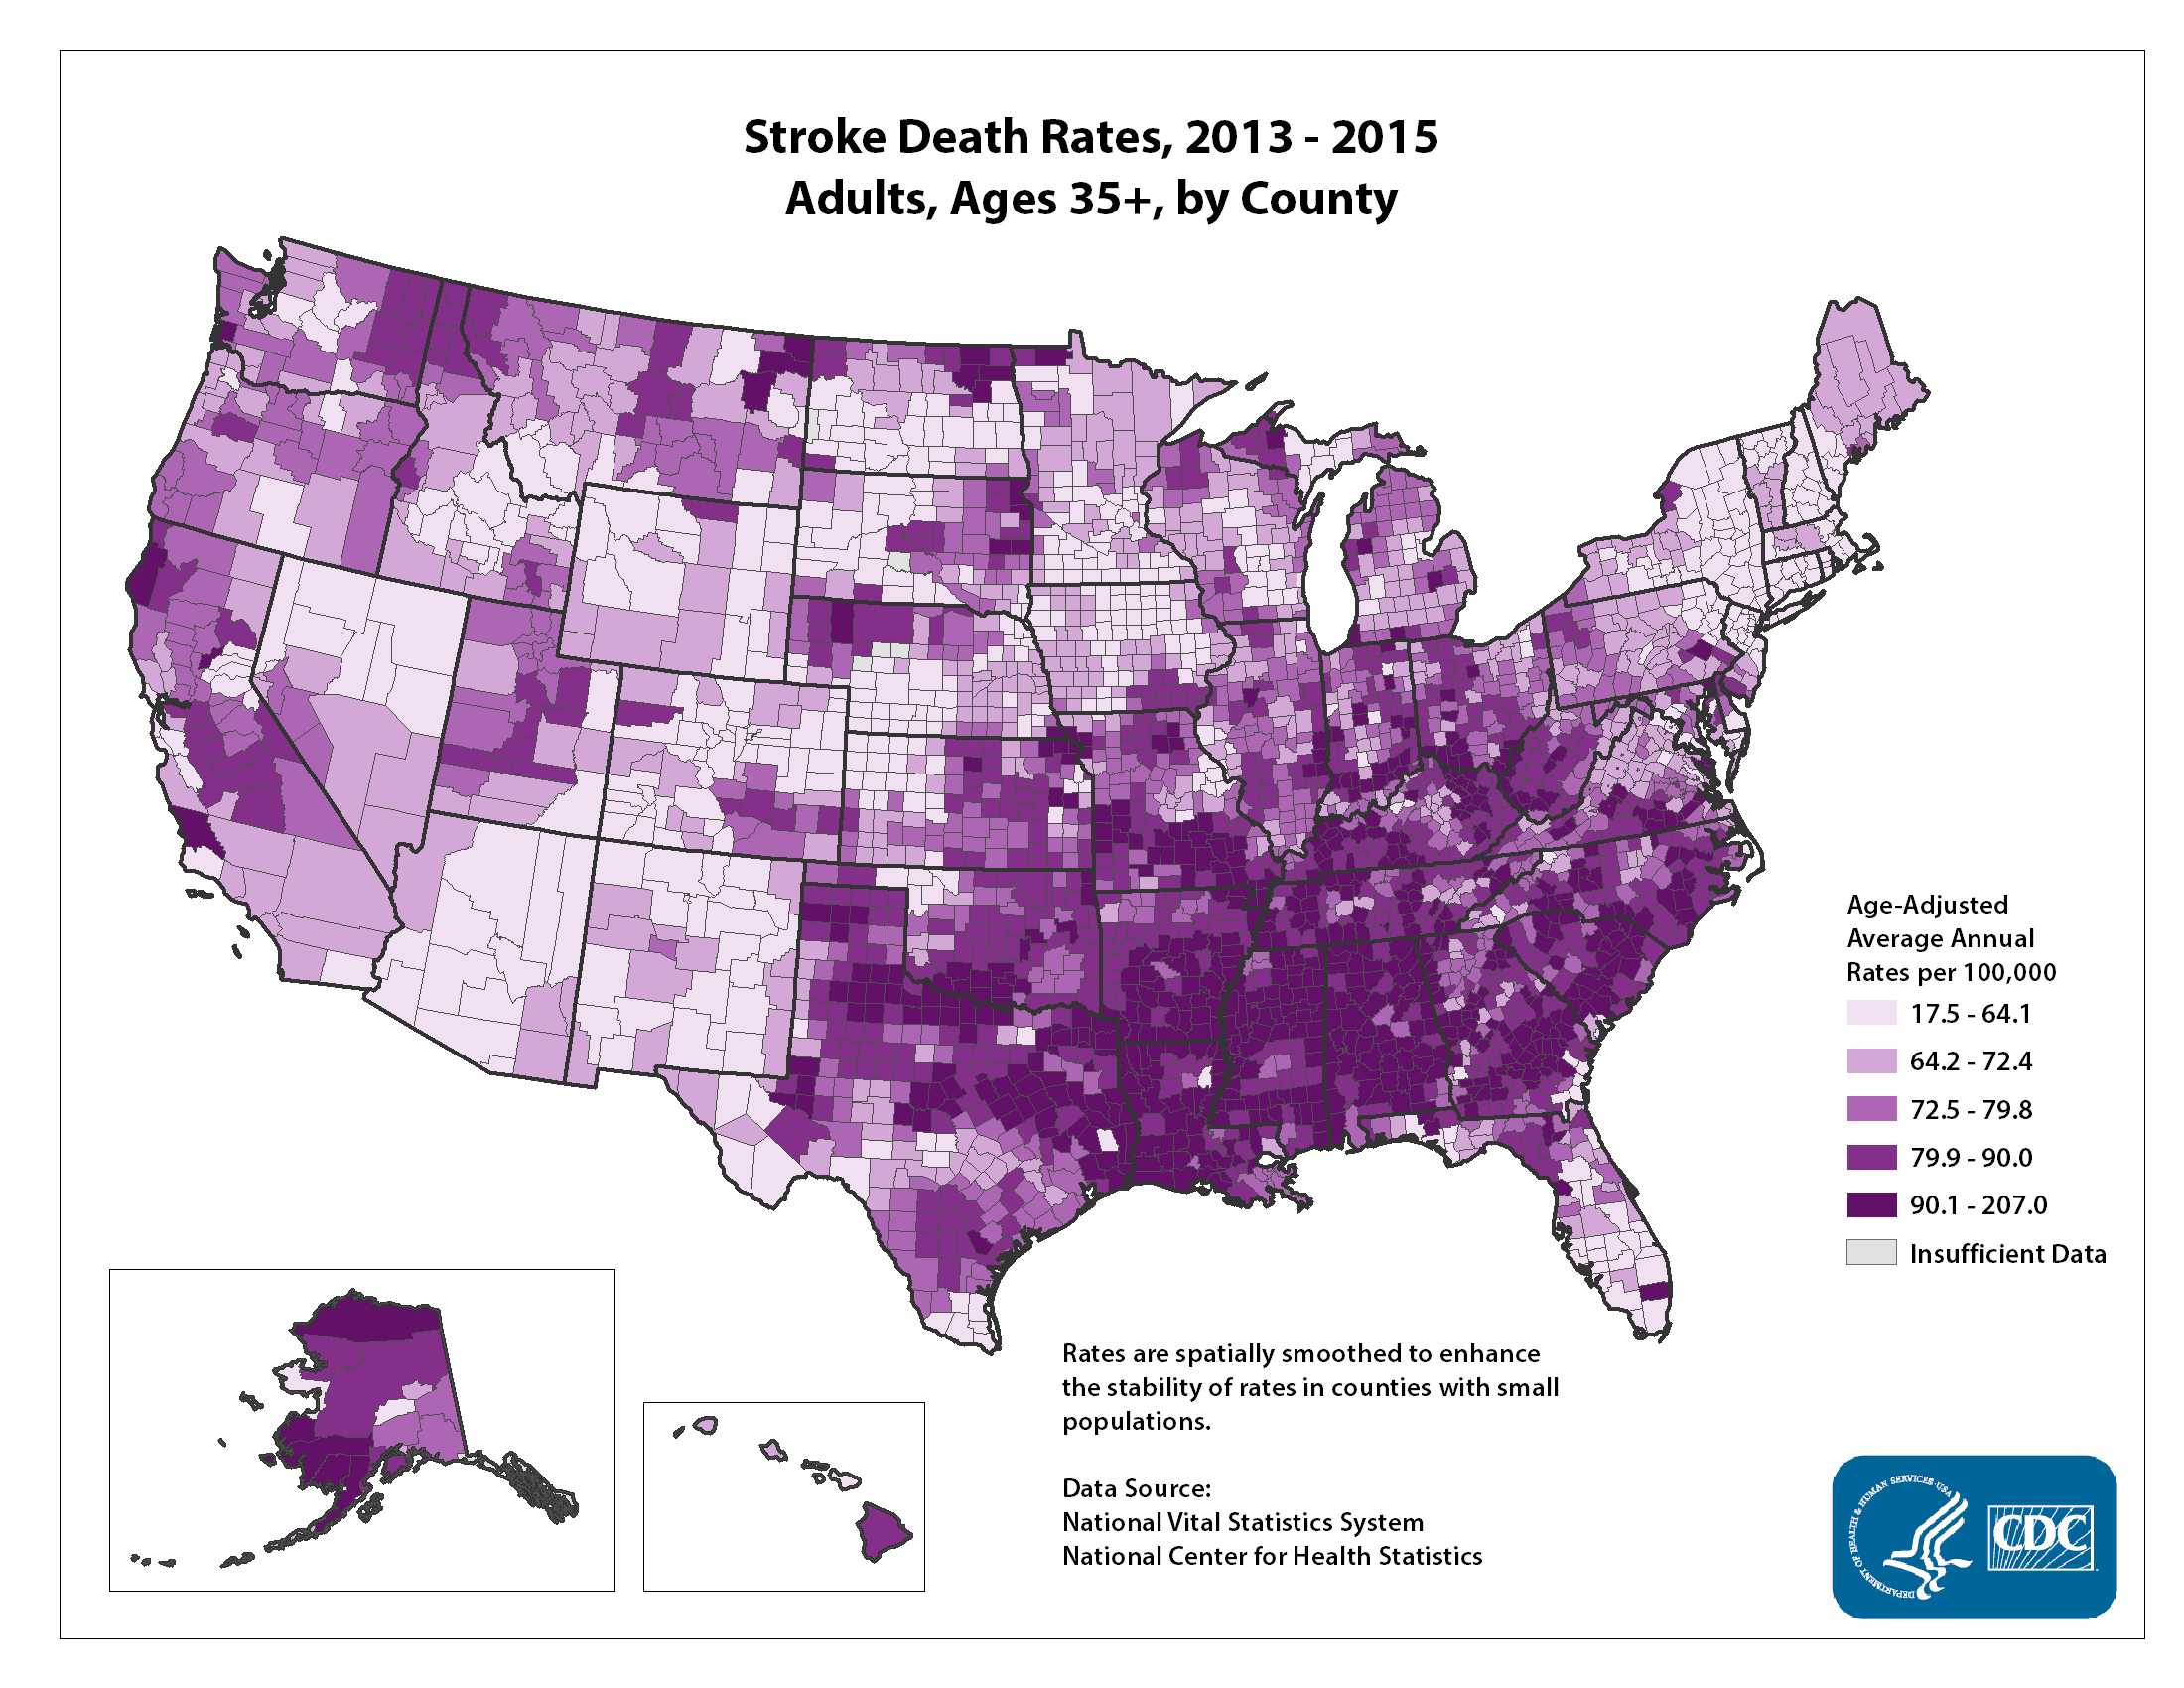 Stroke Death Rates for 2012 through 2014 for Adults Aged 35 Years and Older by County. The map shows that concentrations of counties with the highest stroke death rates - meaning the top quintile - are located primarily in the Southeast, with heavy concentrations of high-rate counties in Alabama, Mississippi, Louisiana, and, Arkansas. Pockets of high-rate counties also are found in Alaska, Georgia, Tennessee, Kentucky, Oklahoma, Texas, and along the coastal plains of North Carolina and South Carolina.